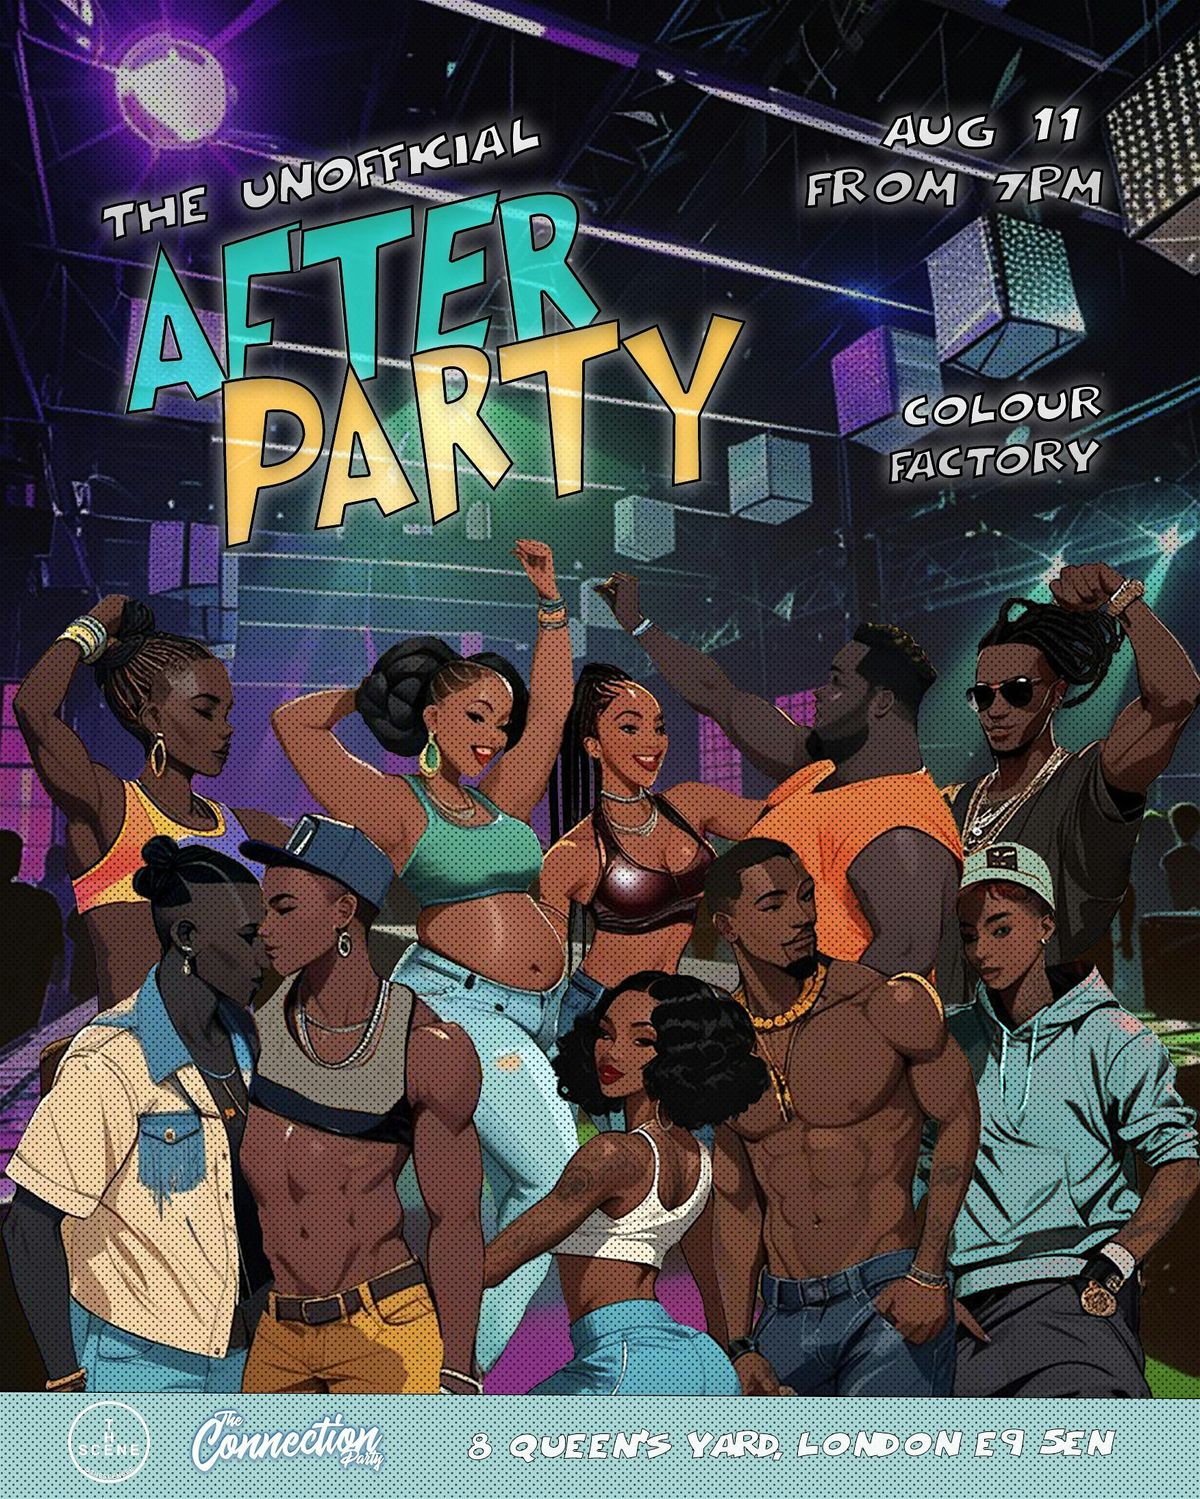 The Connection Party Presents The Unofficial Afterparty